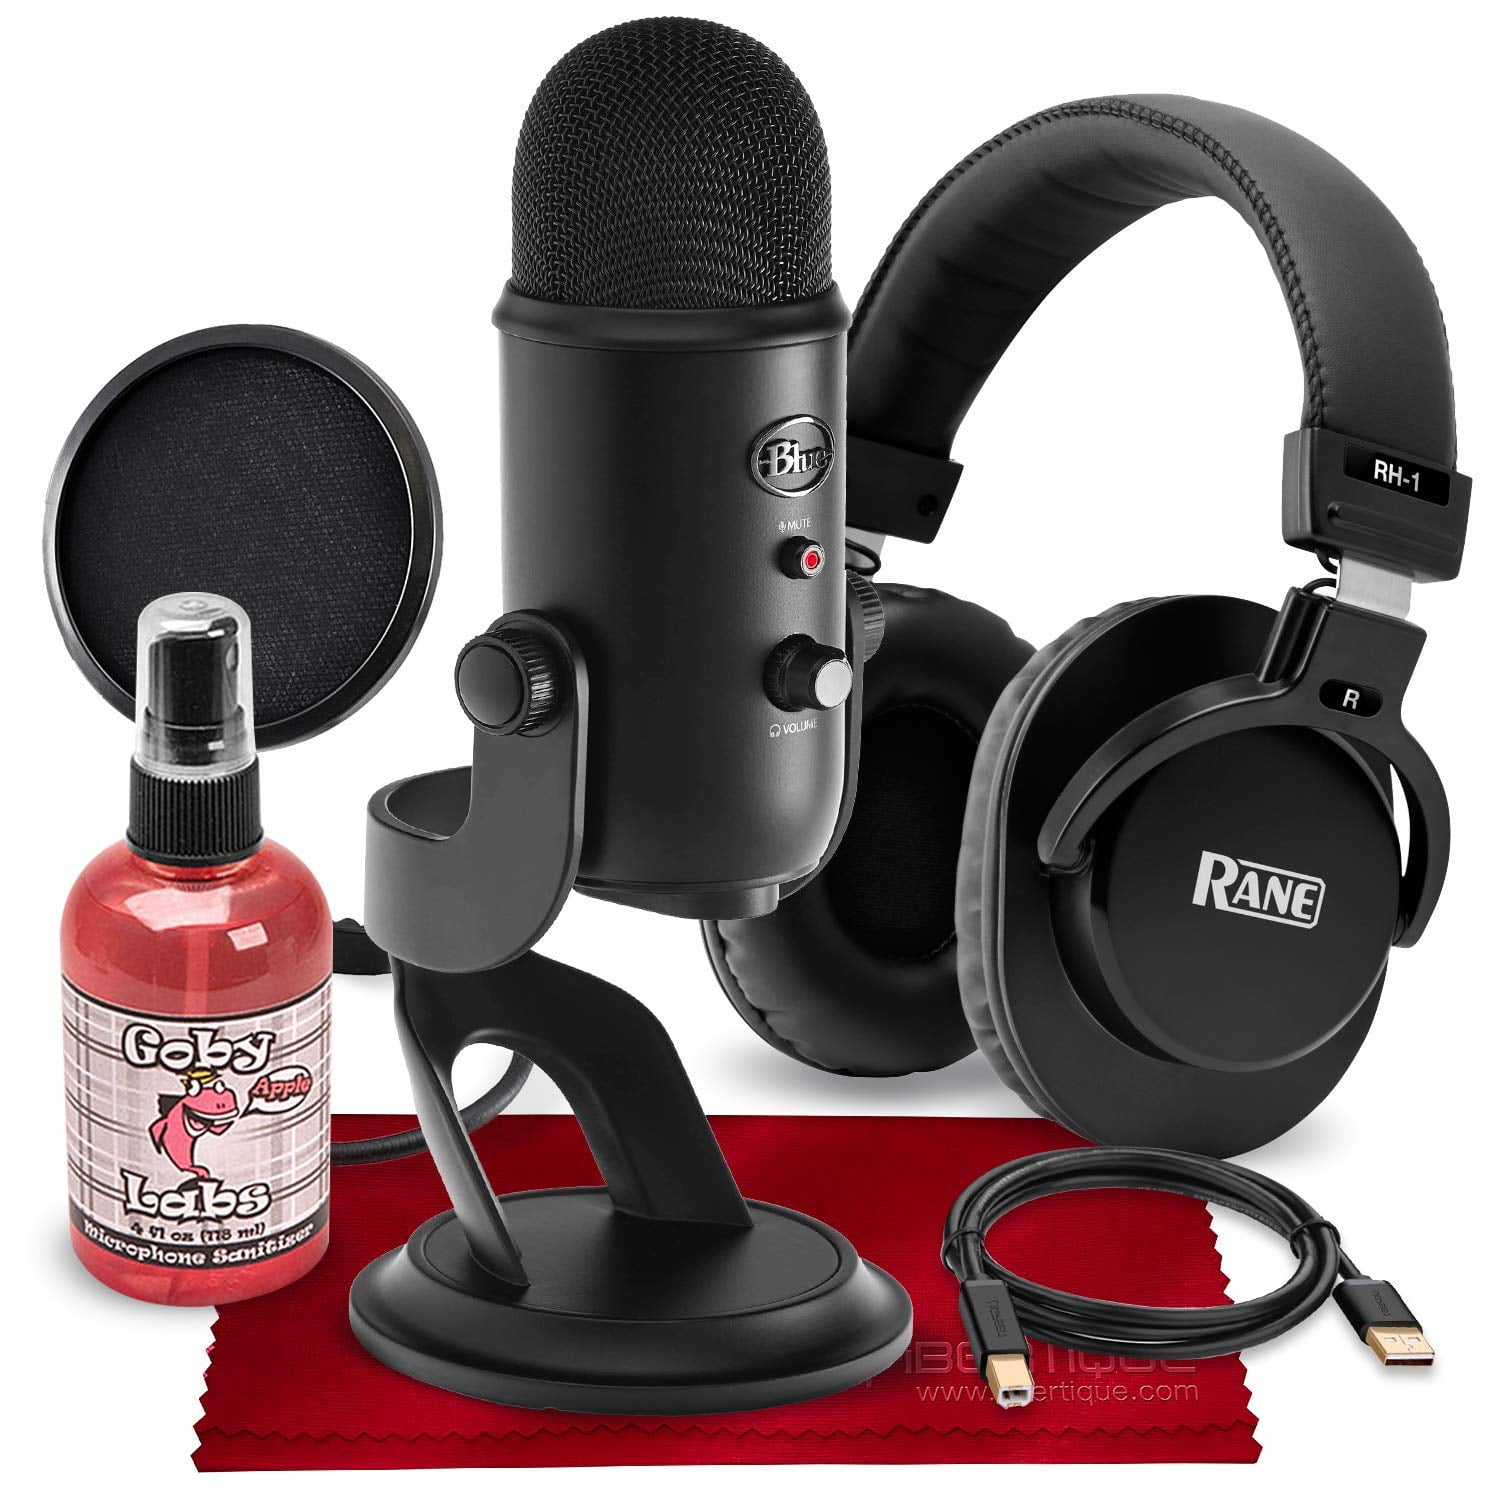 Blue Yeti Usb Microphone Blackout With Studio Monitoring Headphones And Pop Filter Deluxe Accessory Pack Walmart Com Walmart Com